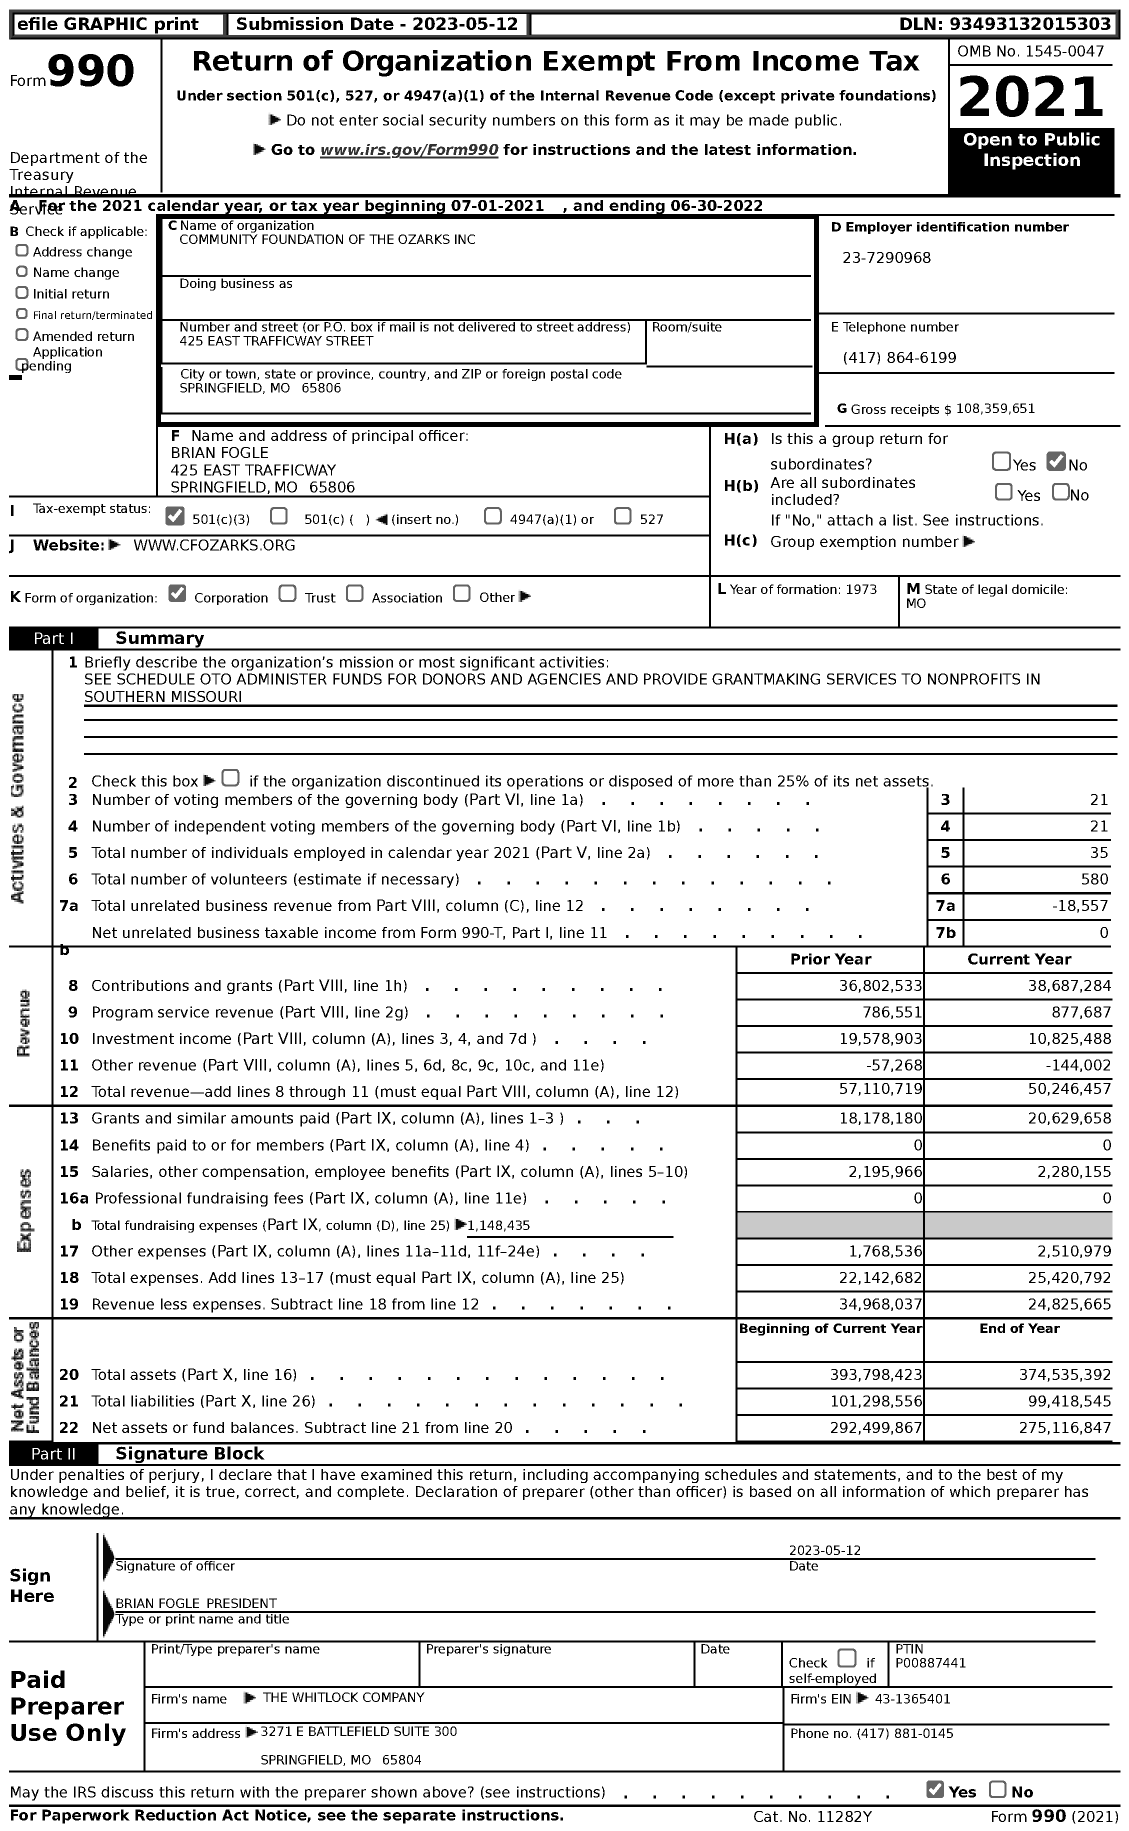 Image of first page of 2021 Form 990 for Community Foundation of the Ozarks (CFO)